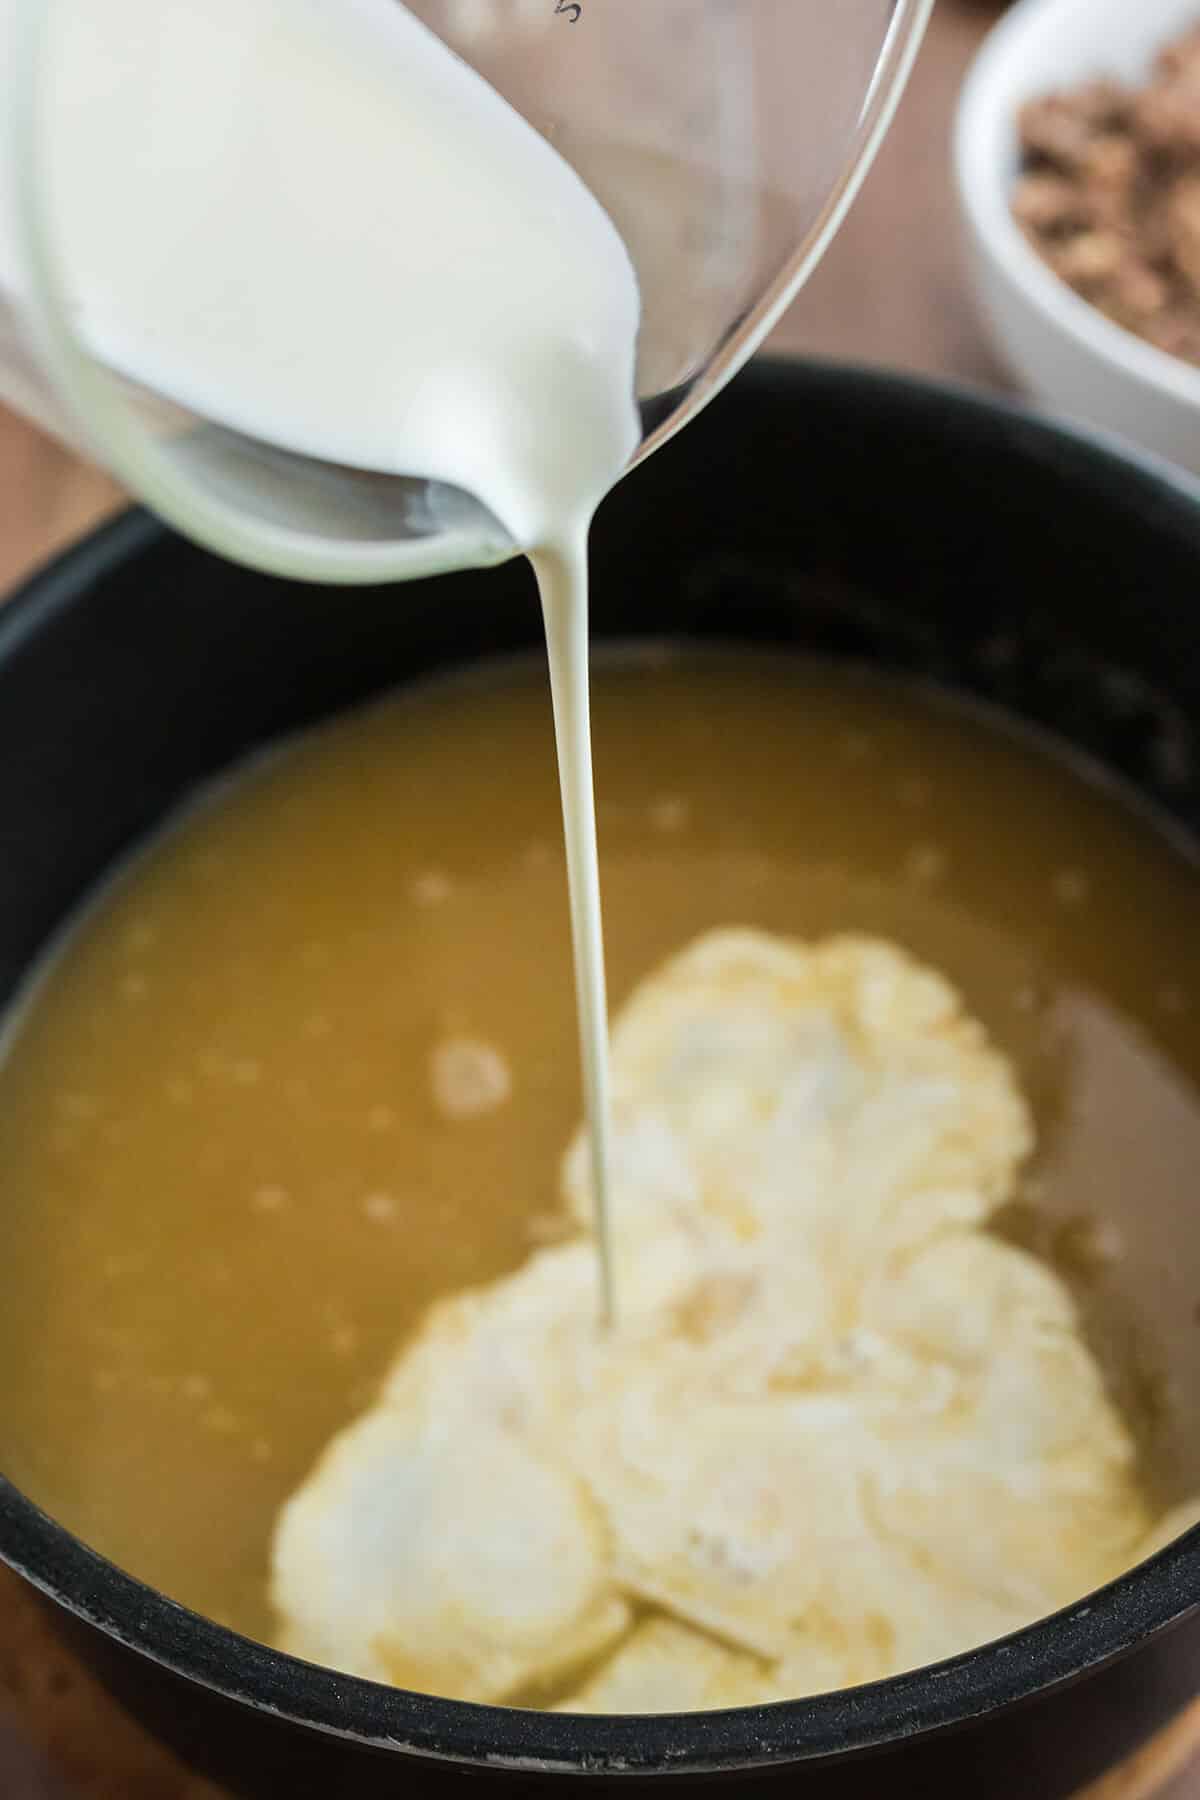 Pouring heavy cream into a pot of stock.